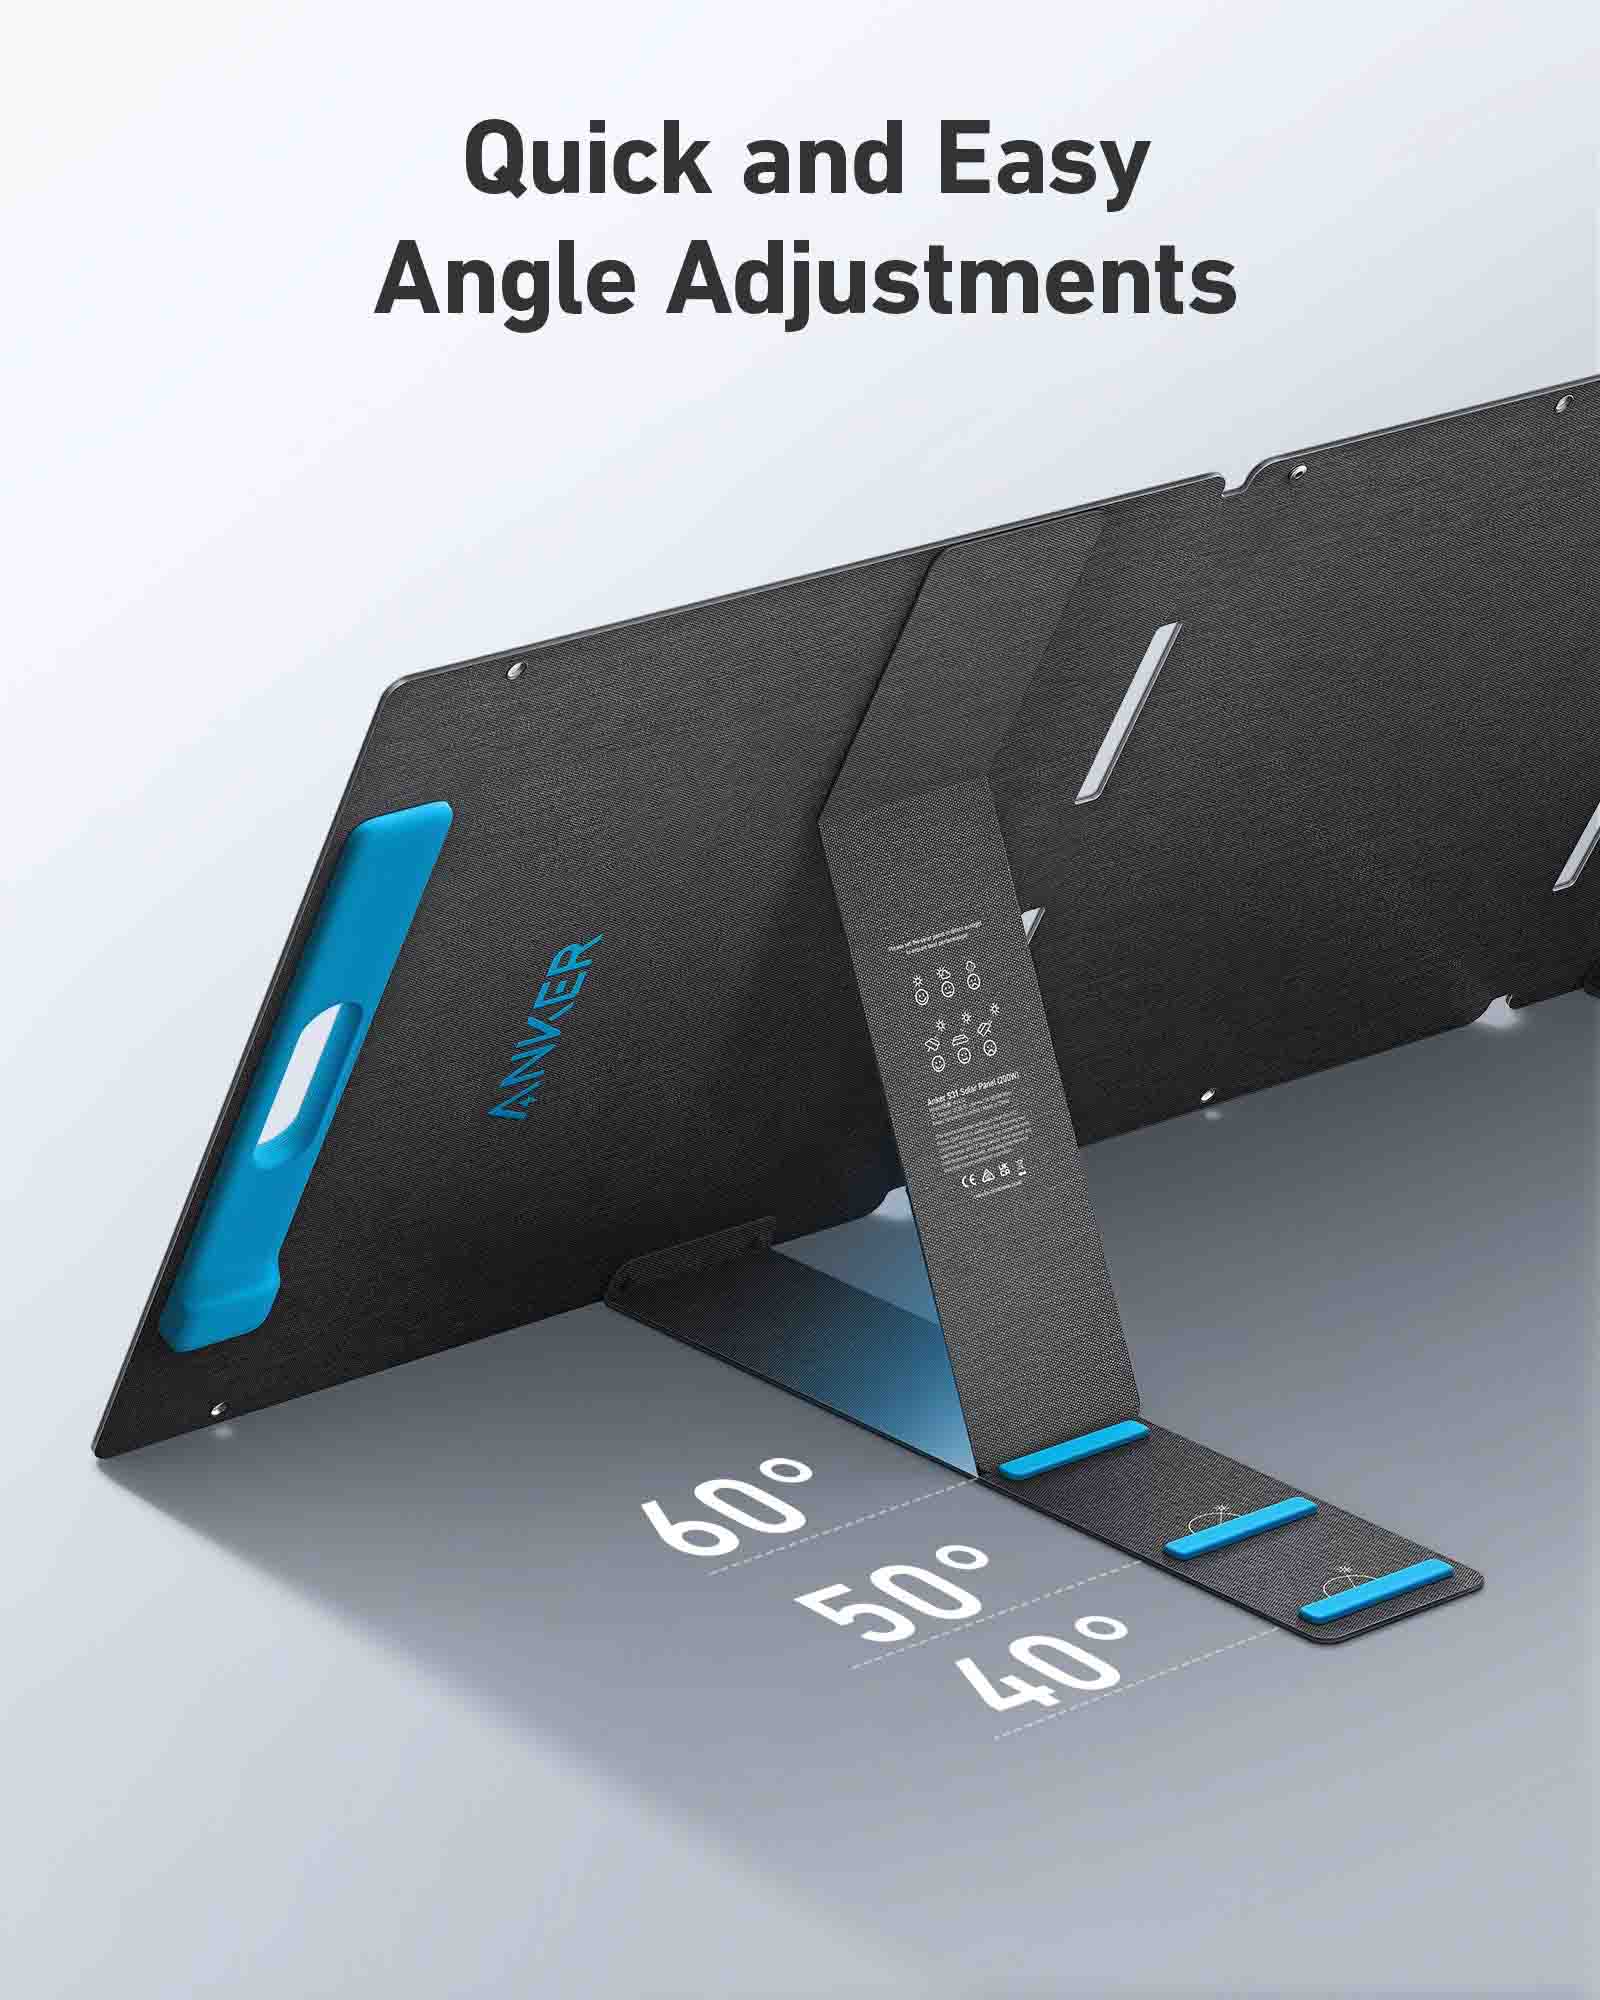 Make Quick And Easy Angle Adjustments With The Anker 521 200W Solar Panel